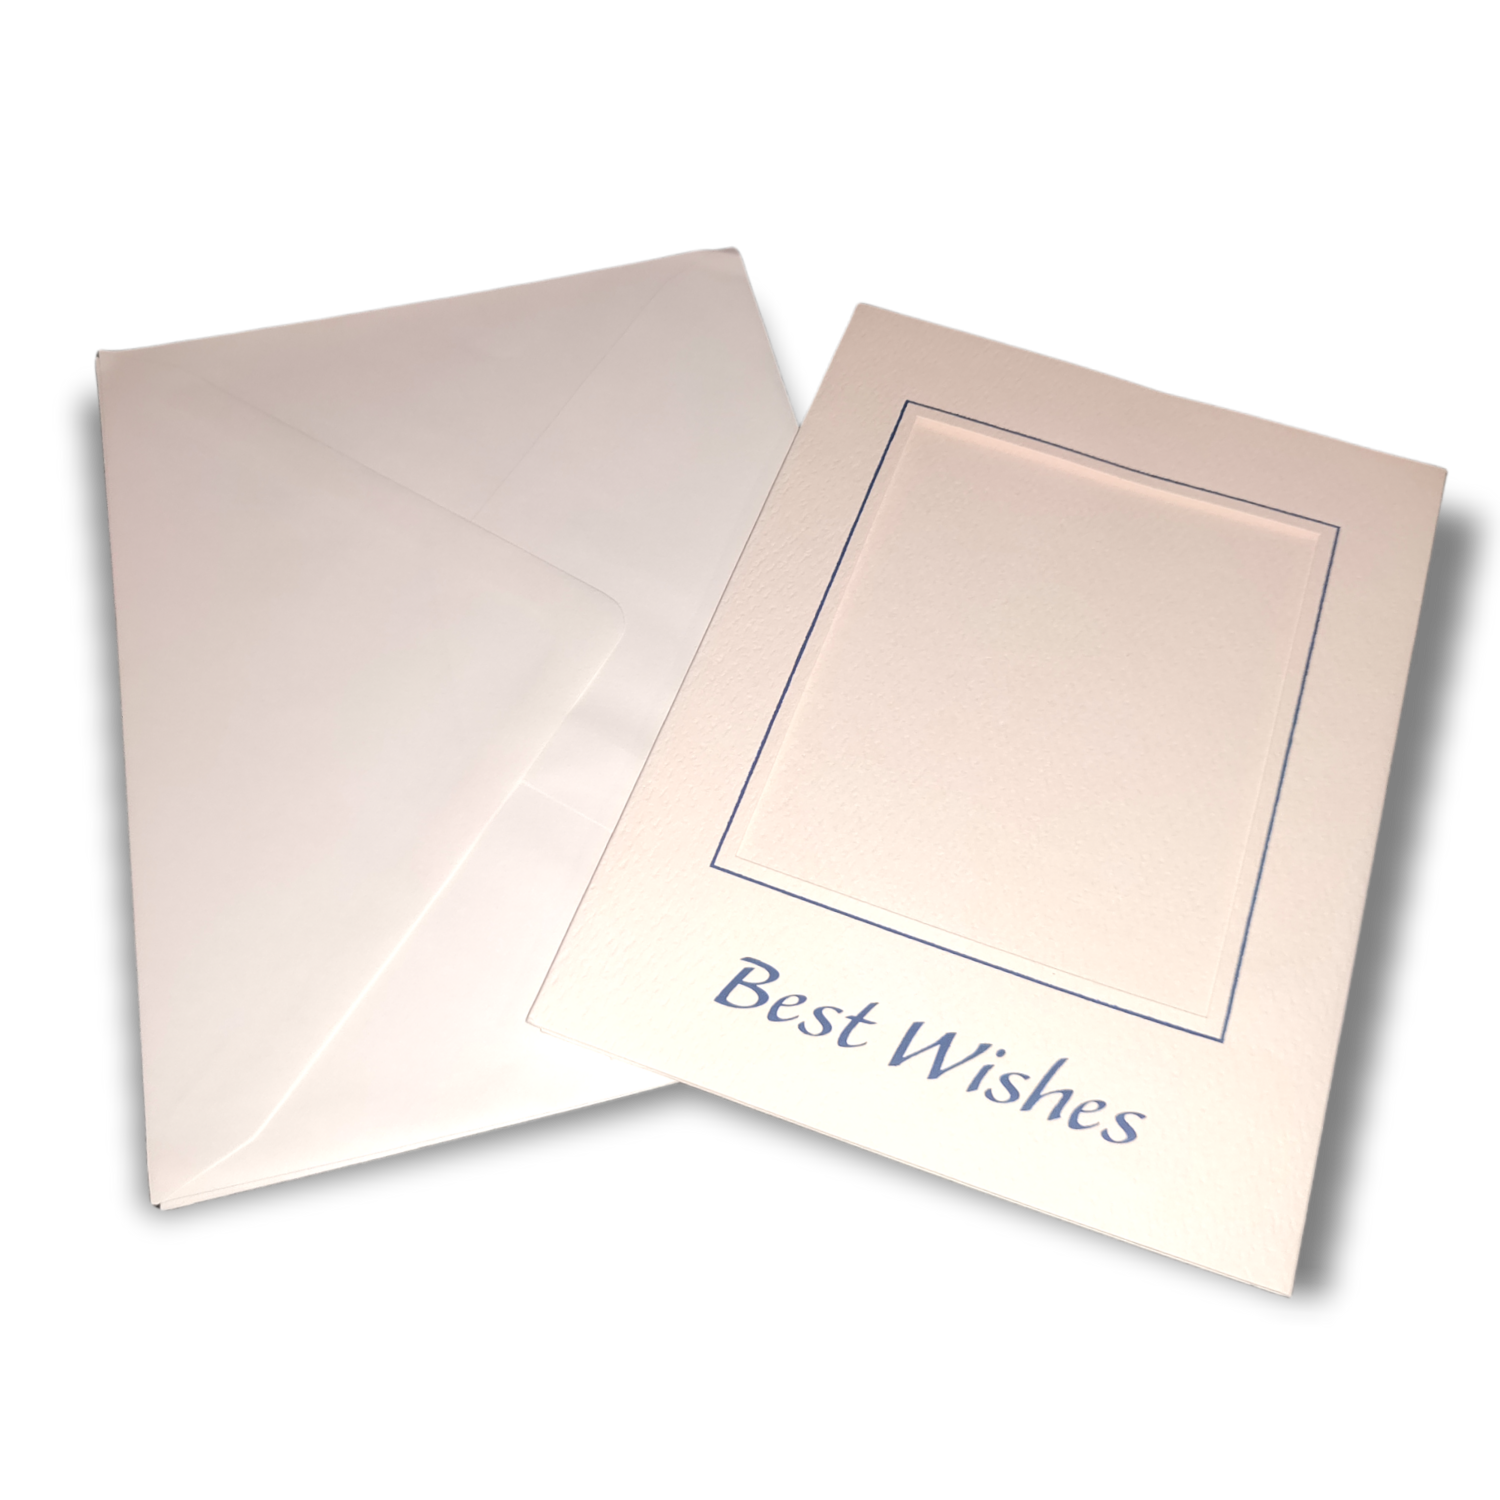 2x Best Wishes Double Fold Blue Foil Printed Aperture Cards & Envelopes 145x198mm